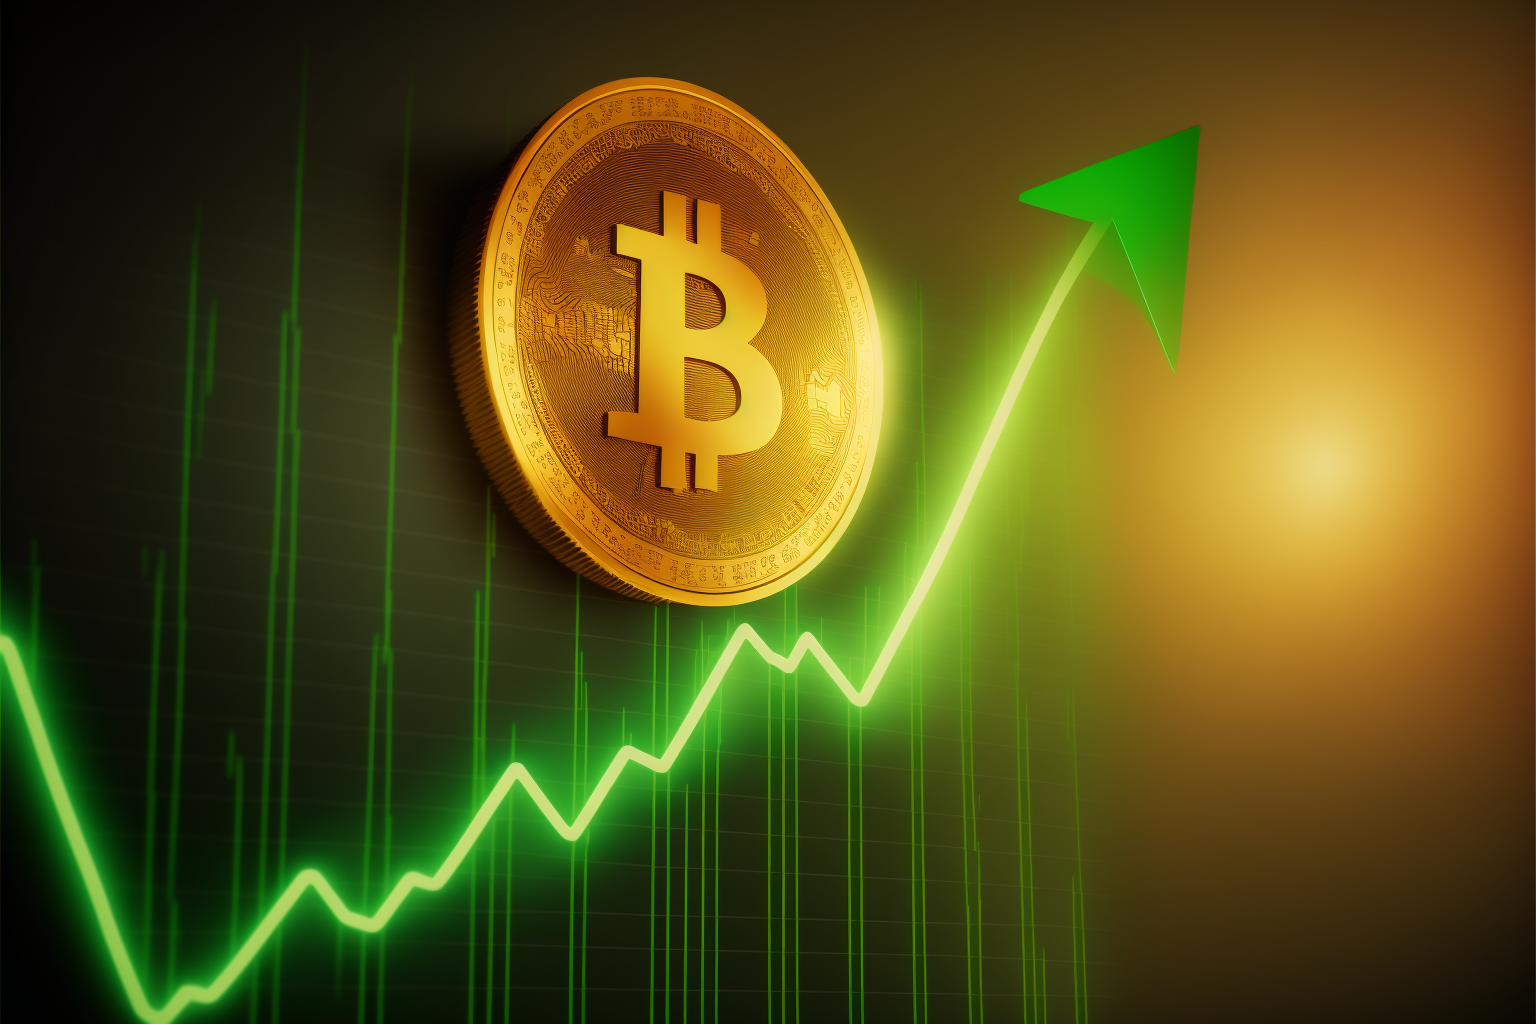 Bitcoin hits record high. Here's what's driving up the price. - CBS News